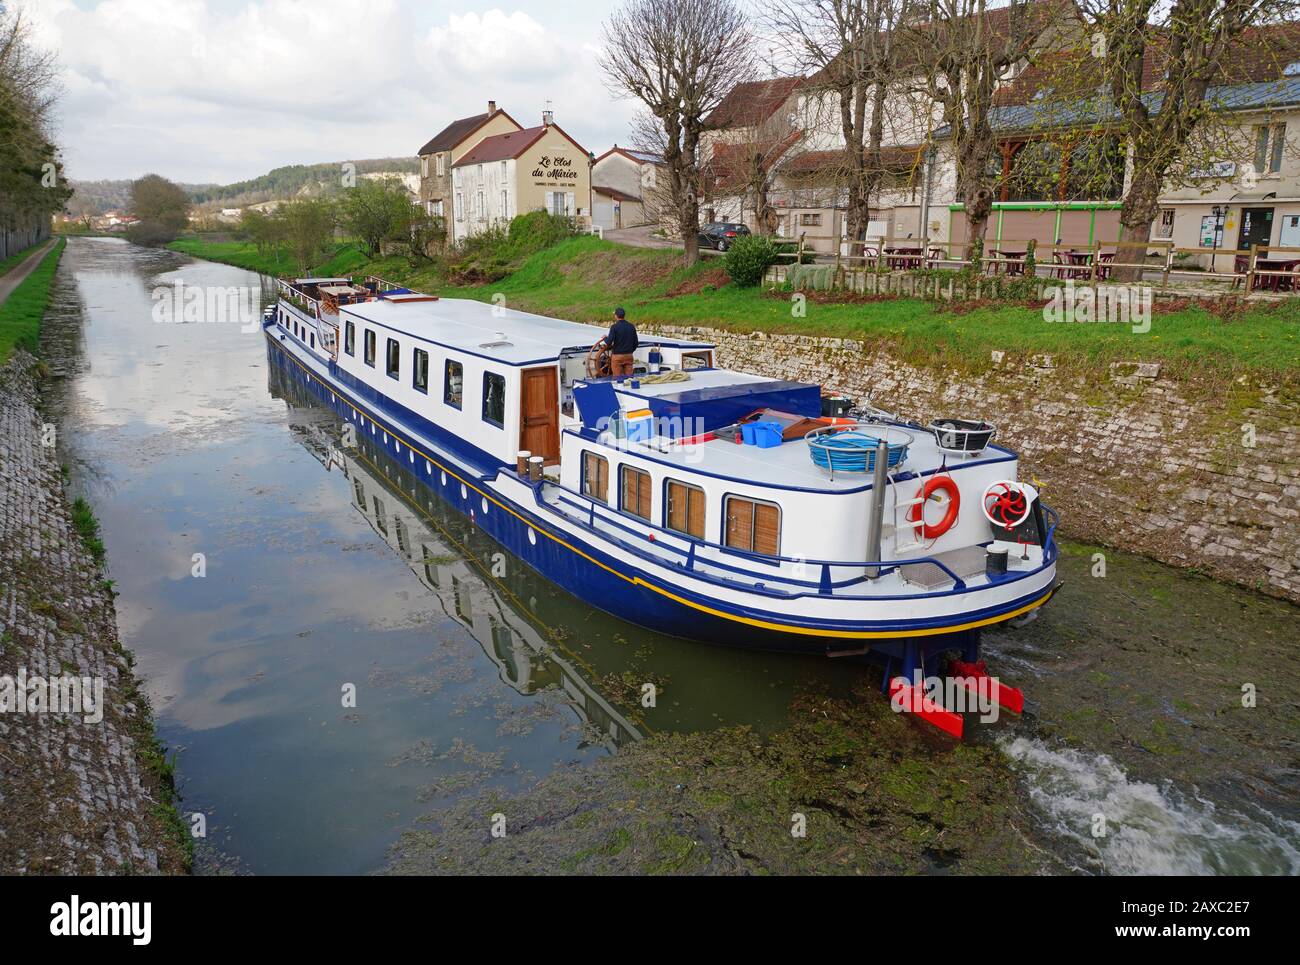 La Belle Epoque luxury barge on the Burgundy Canal (Canal de Bourgogne) in Chassignelles, France. Stock Photo